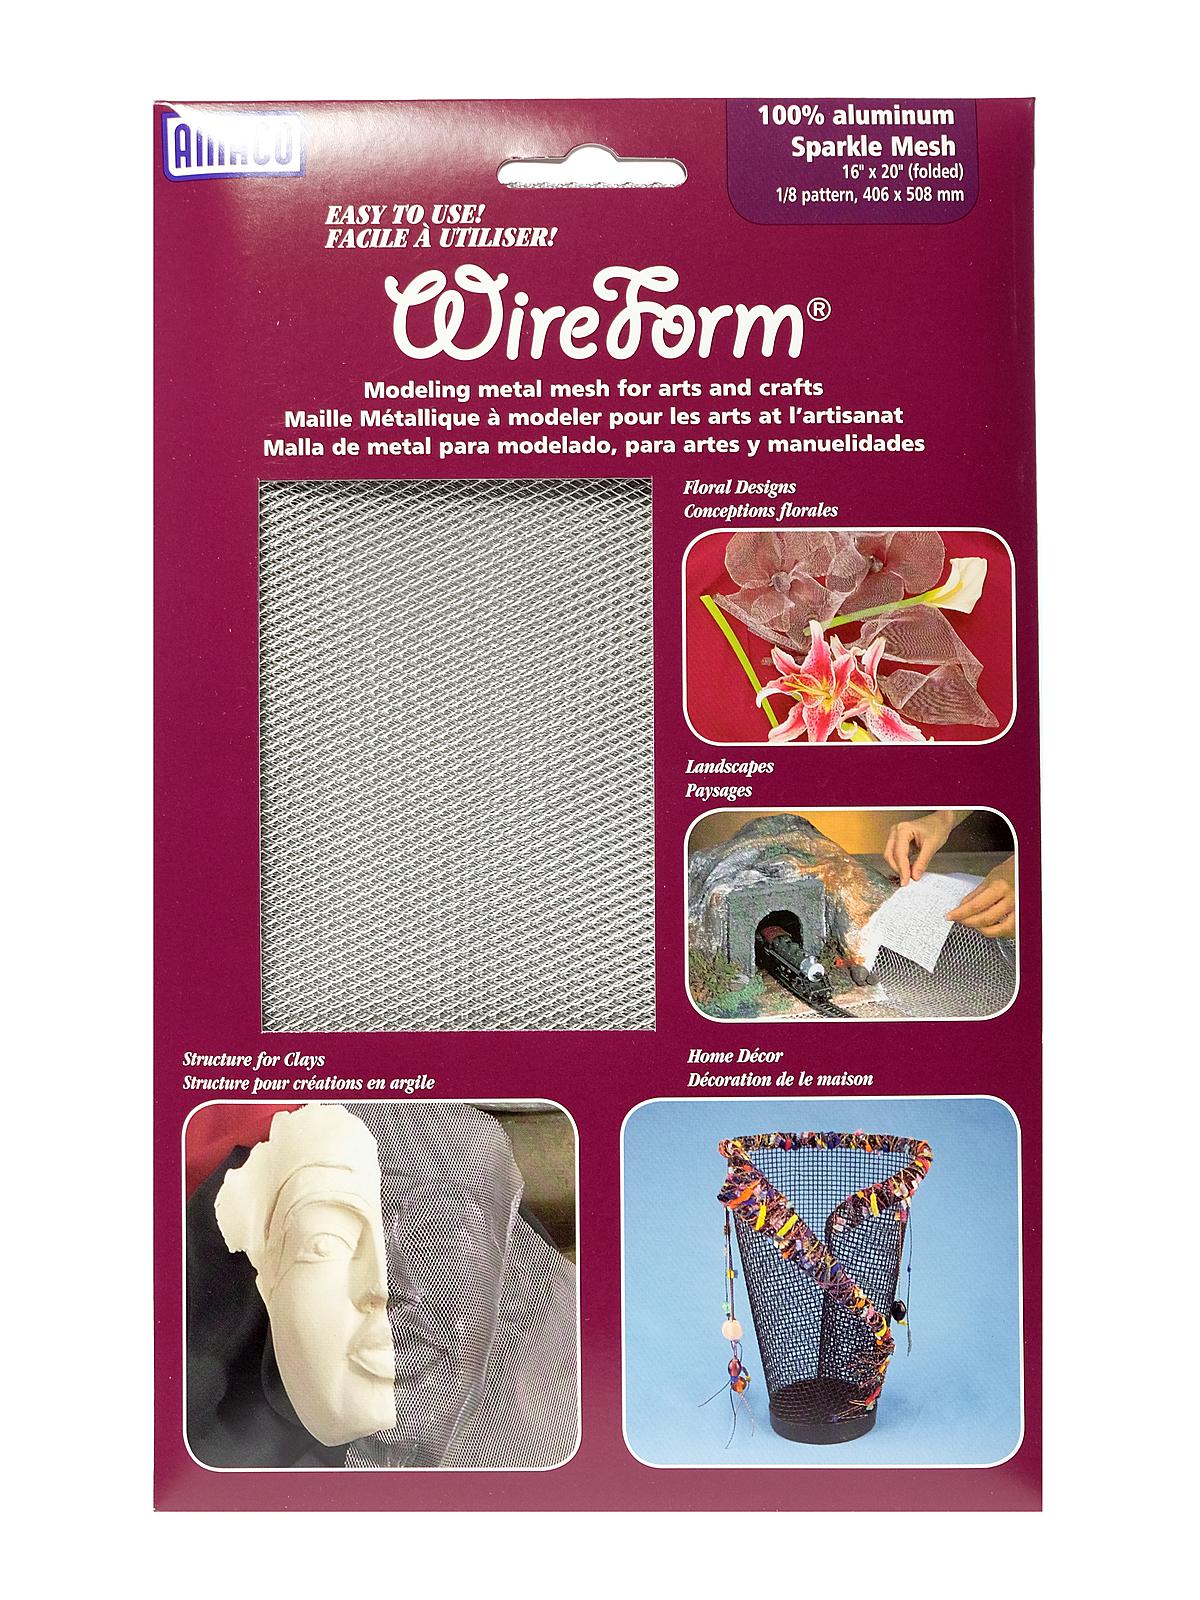 Wireform Metal Mesh Aluminum Woven Sparkle Mesh - 1 8 In. Pattern Mini-pack